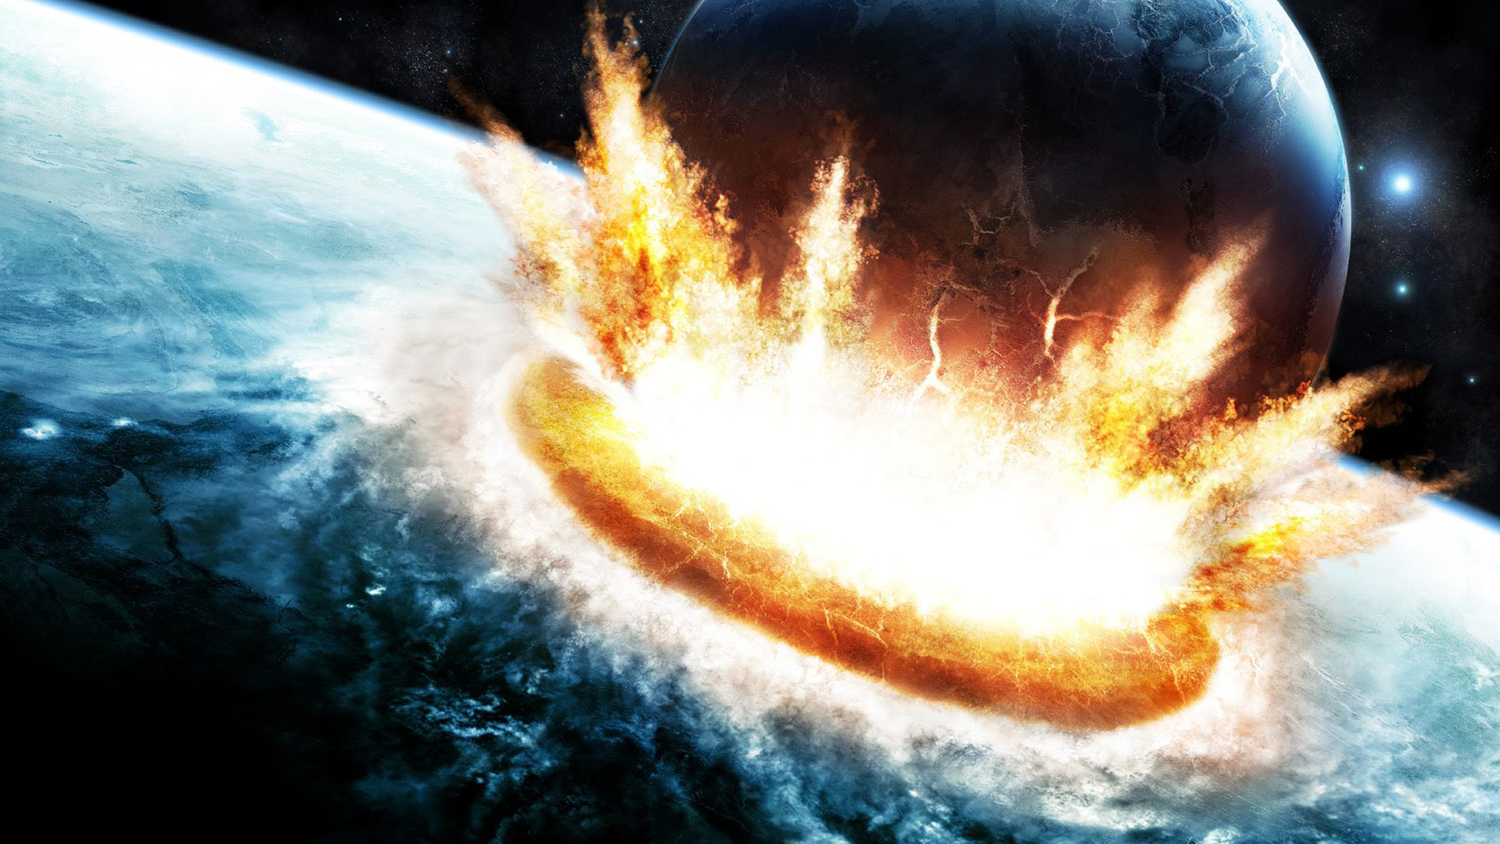 MOONFALL: Roland Emmerich's Directing Another Disaster Movie ...